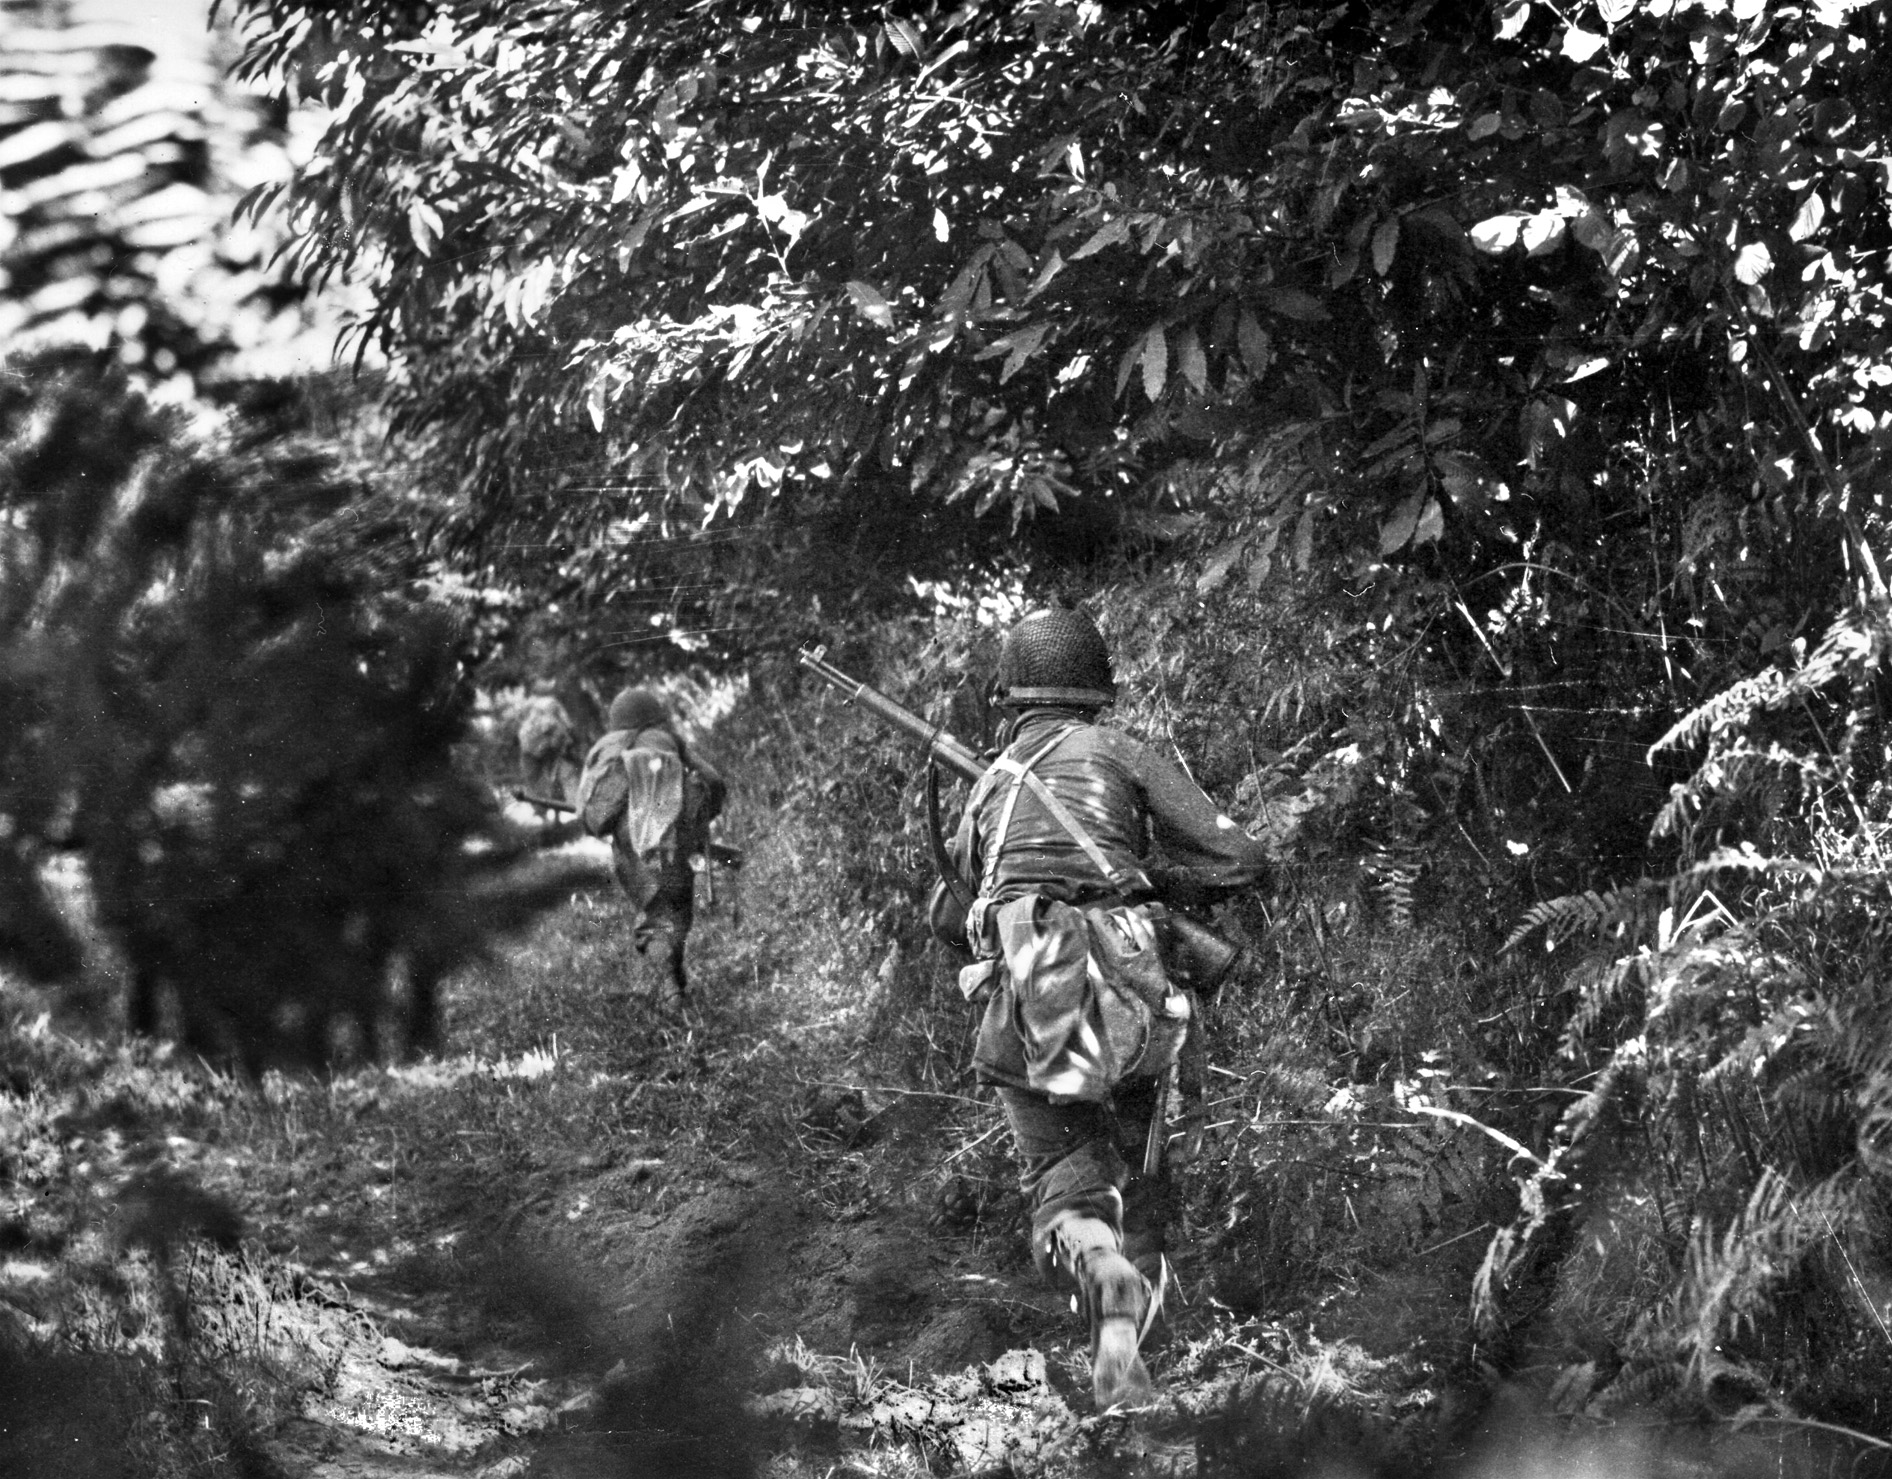 Men of the 30th Division race along a hedgerow to reinforce a new position at Hill 314, August 8, 1944.